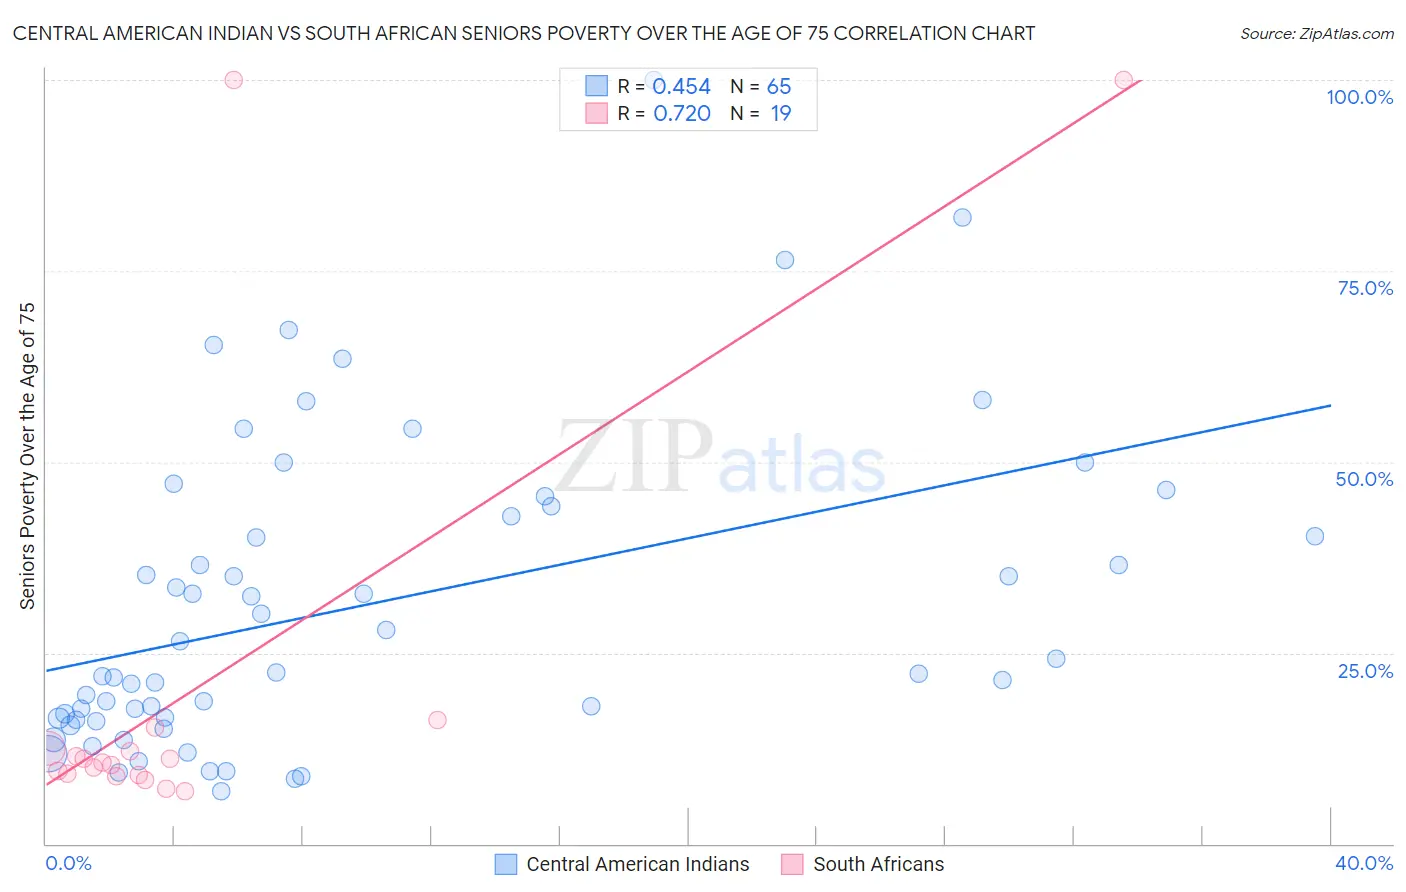 Central American Indian vs South African Seniors Poverty Over the Age of 75